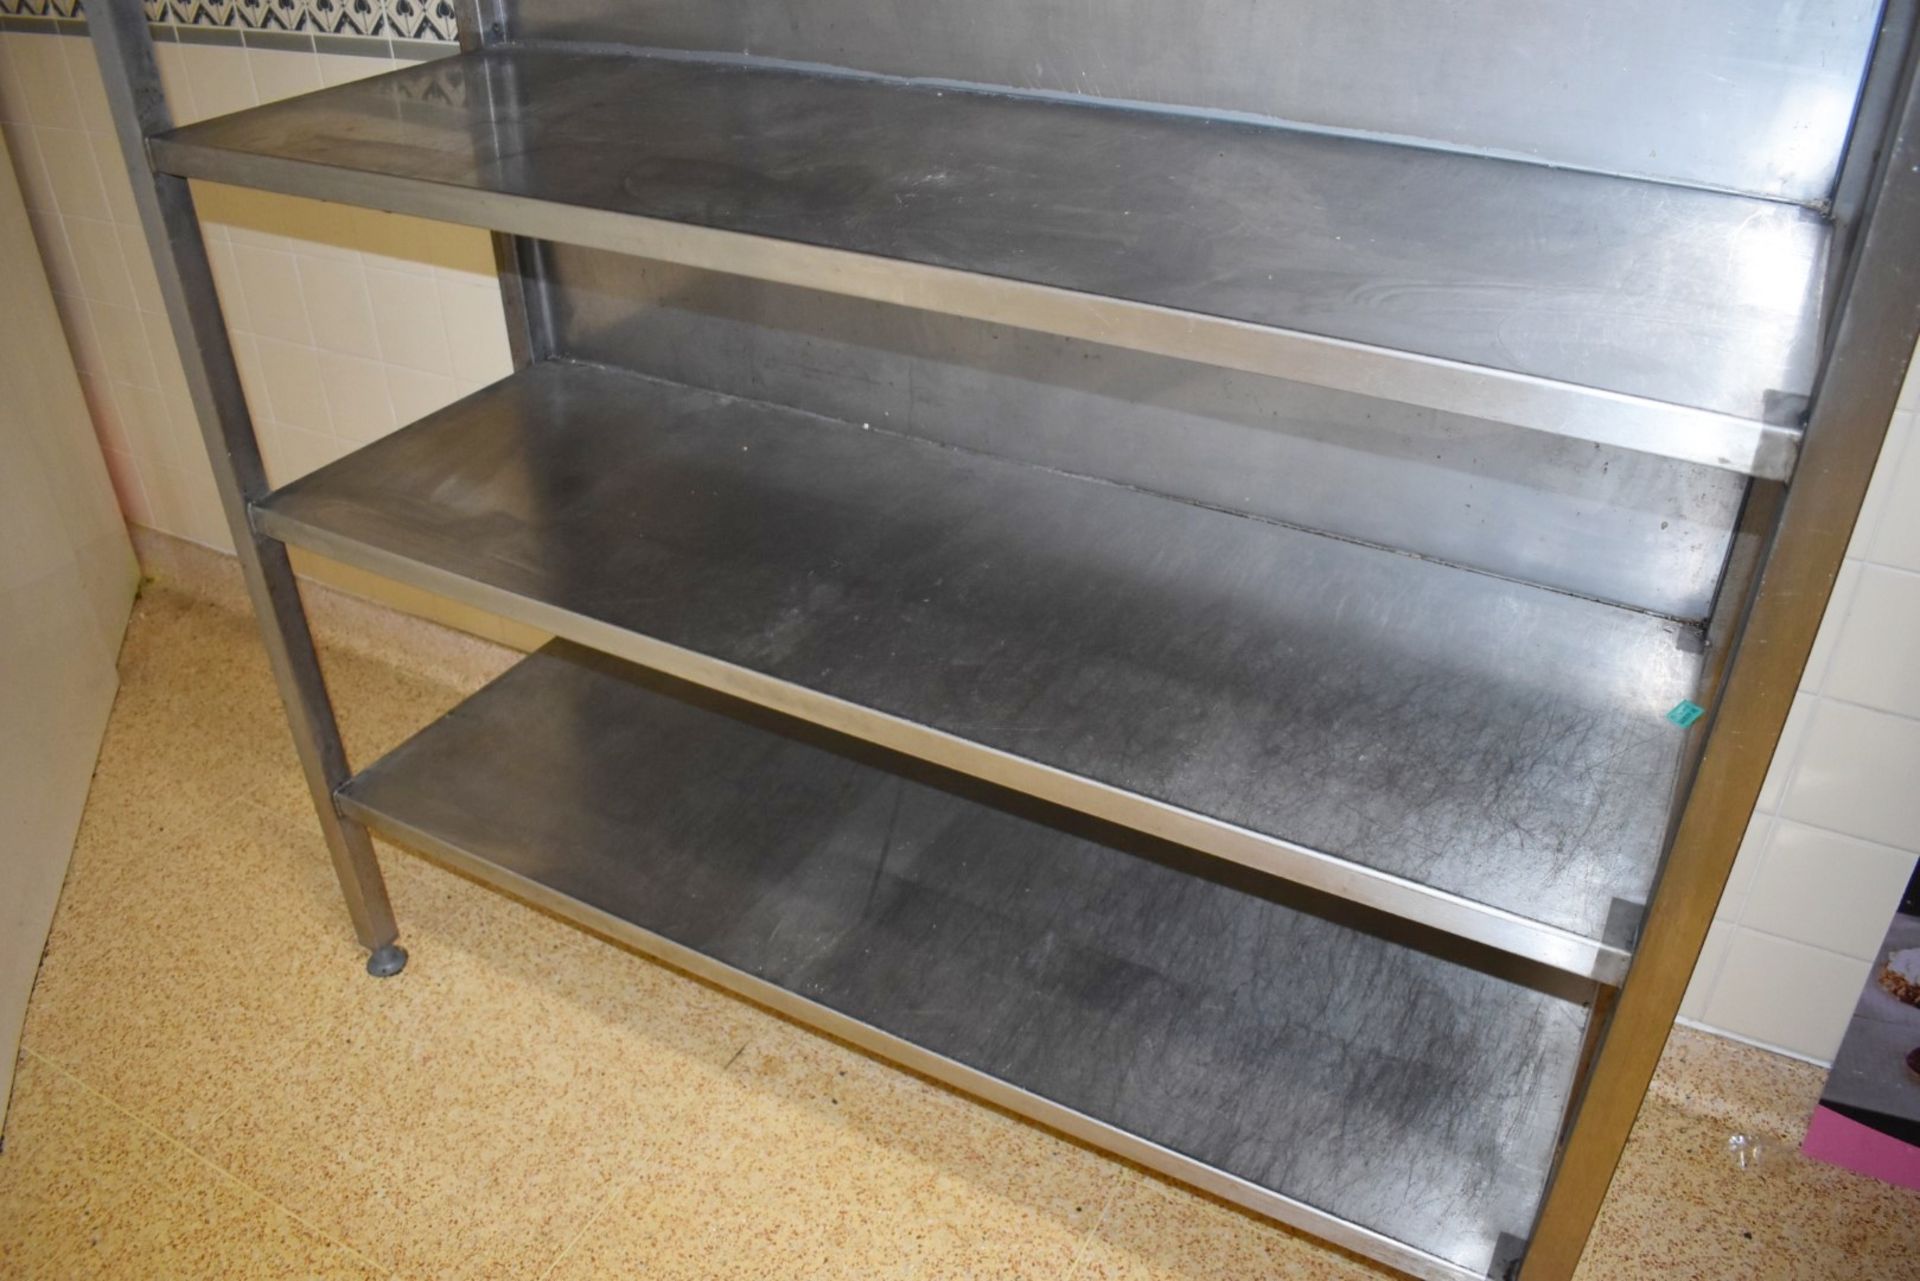 1 x Four Tier Stainless Steel Storage Shelf Unit With Solid Back - H190 x W150 x D50 cms - CL455 - - Image 2 of 2